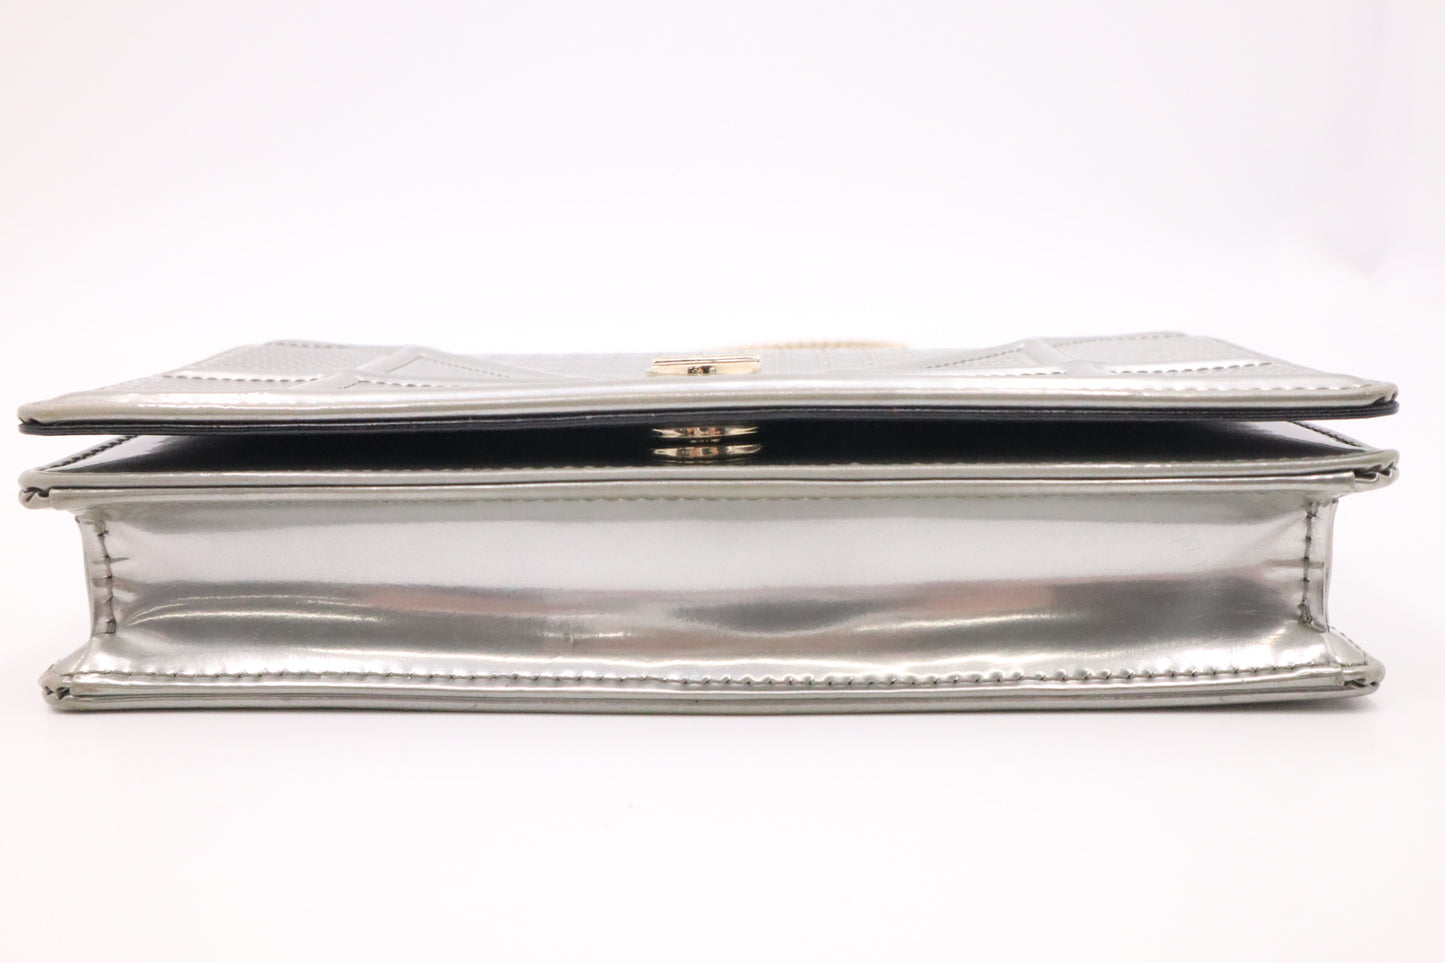 Dior Diorama Clutch on Chain in Silver Leather